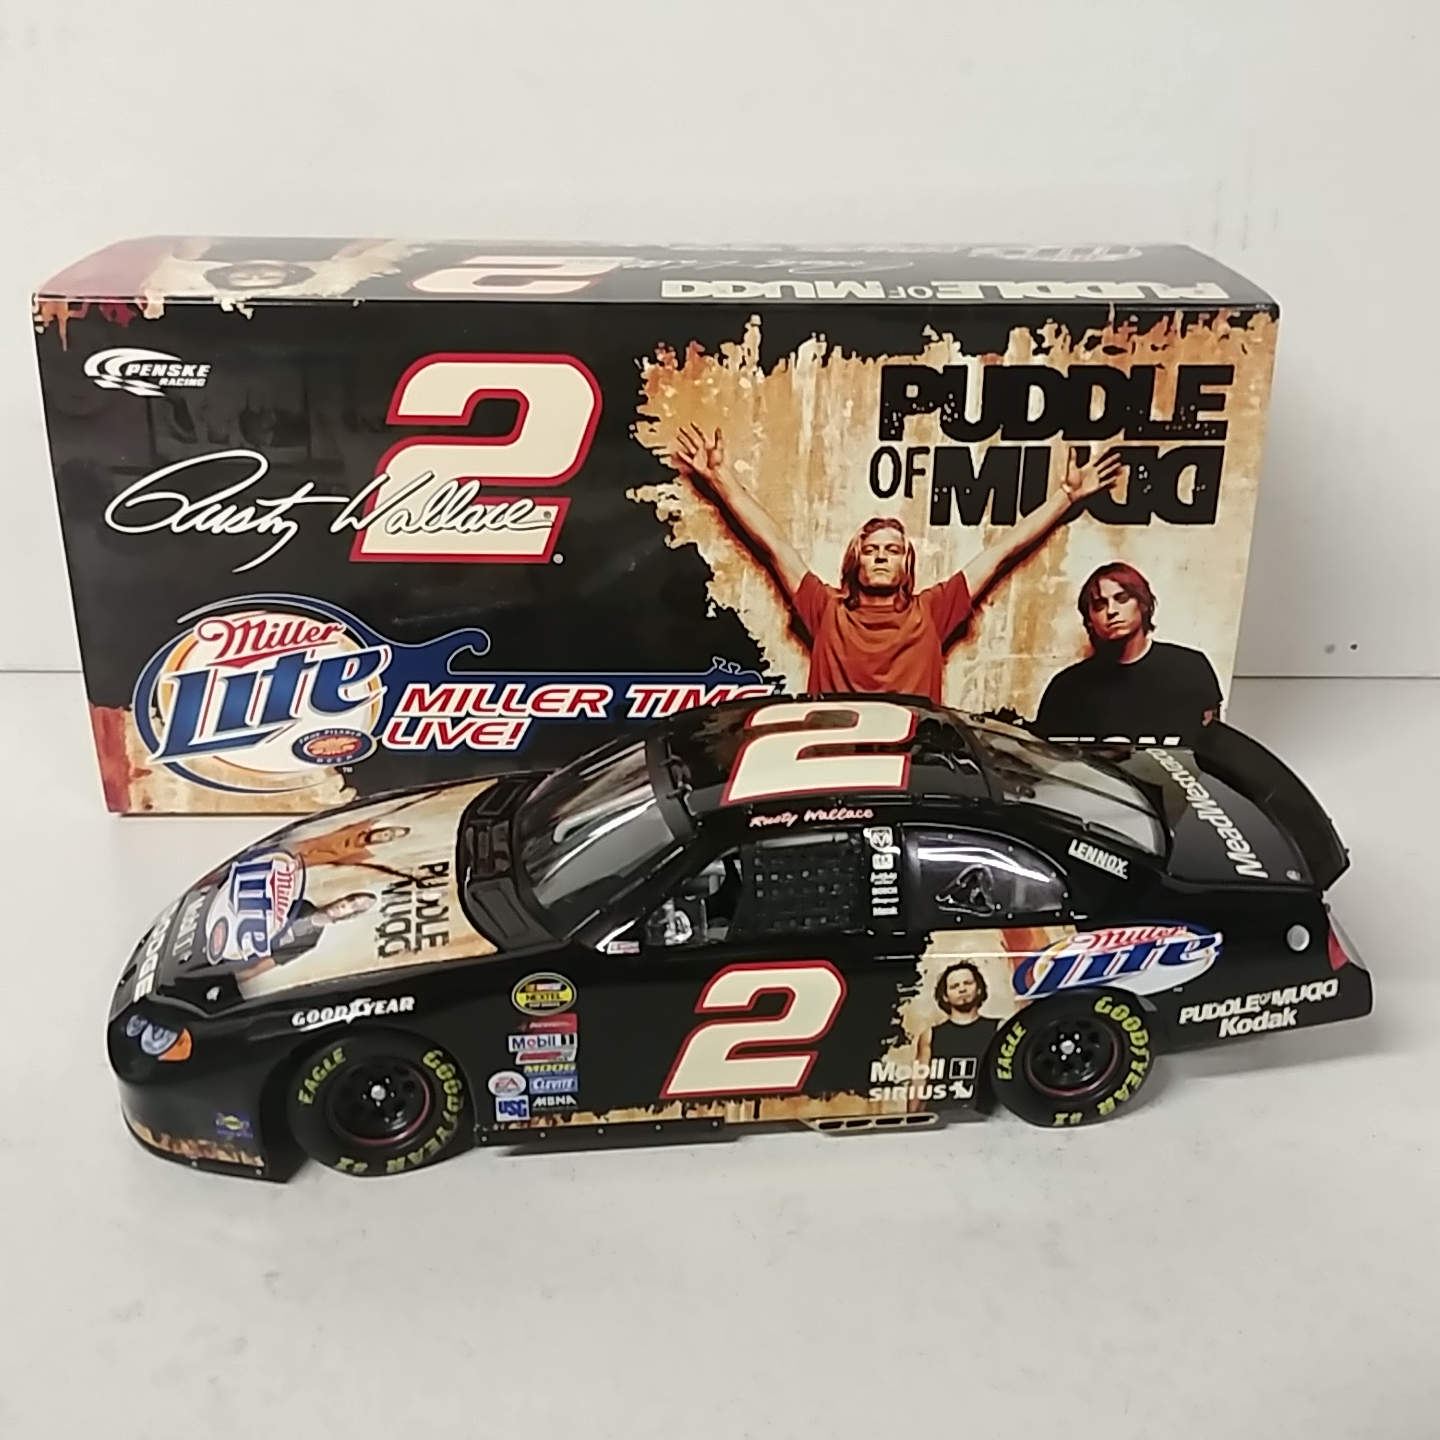 2004 Rusty Wallace 1/24th iller Lite "Puddle of Mud" c/w car